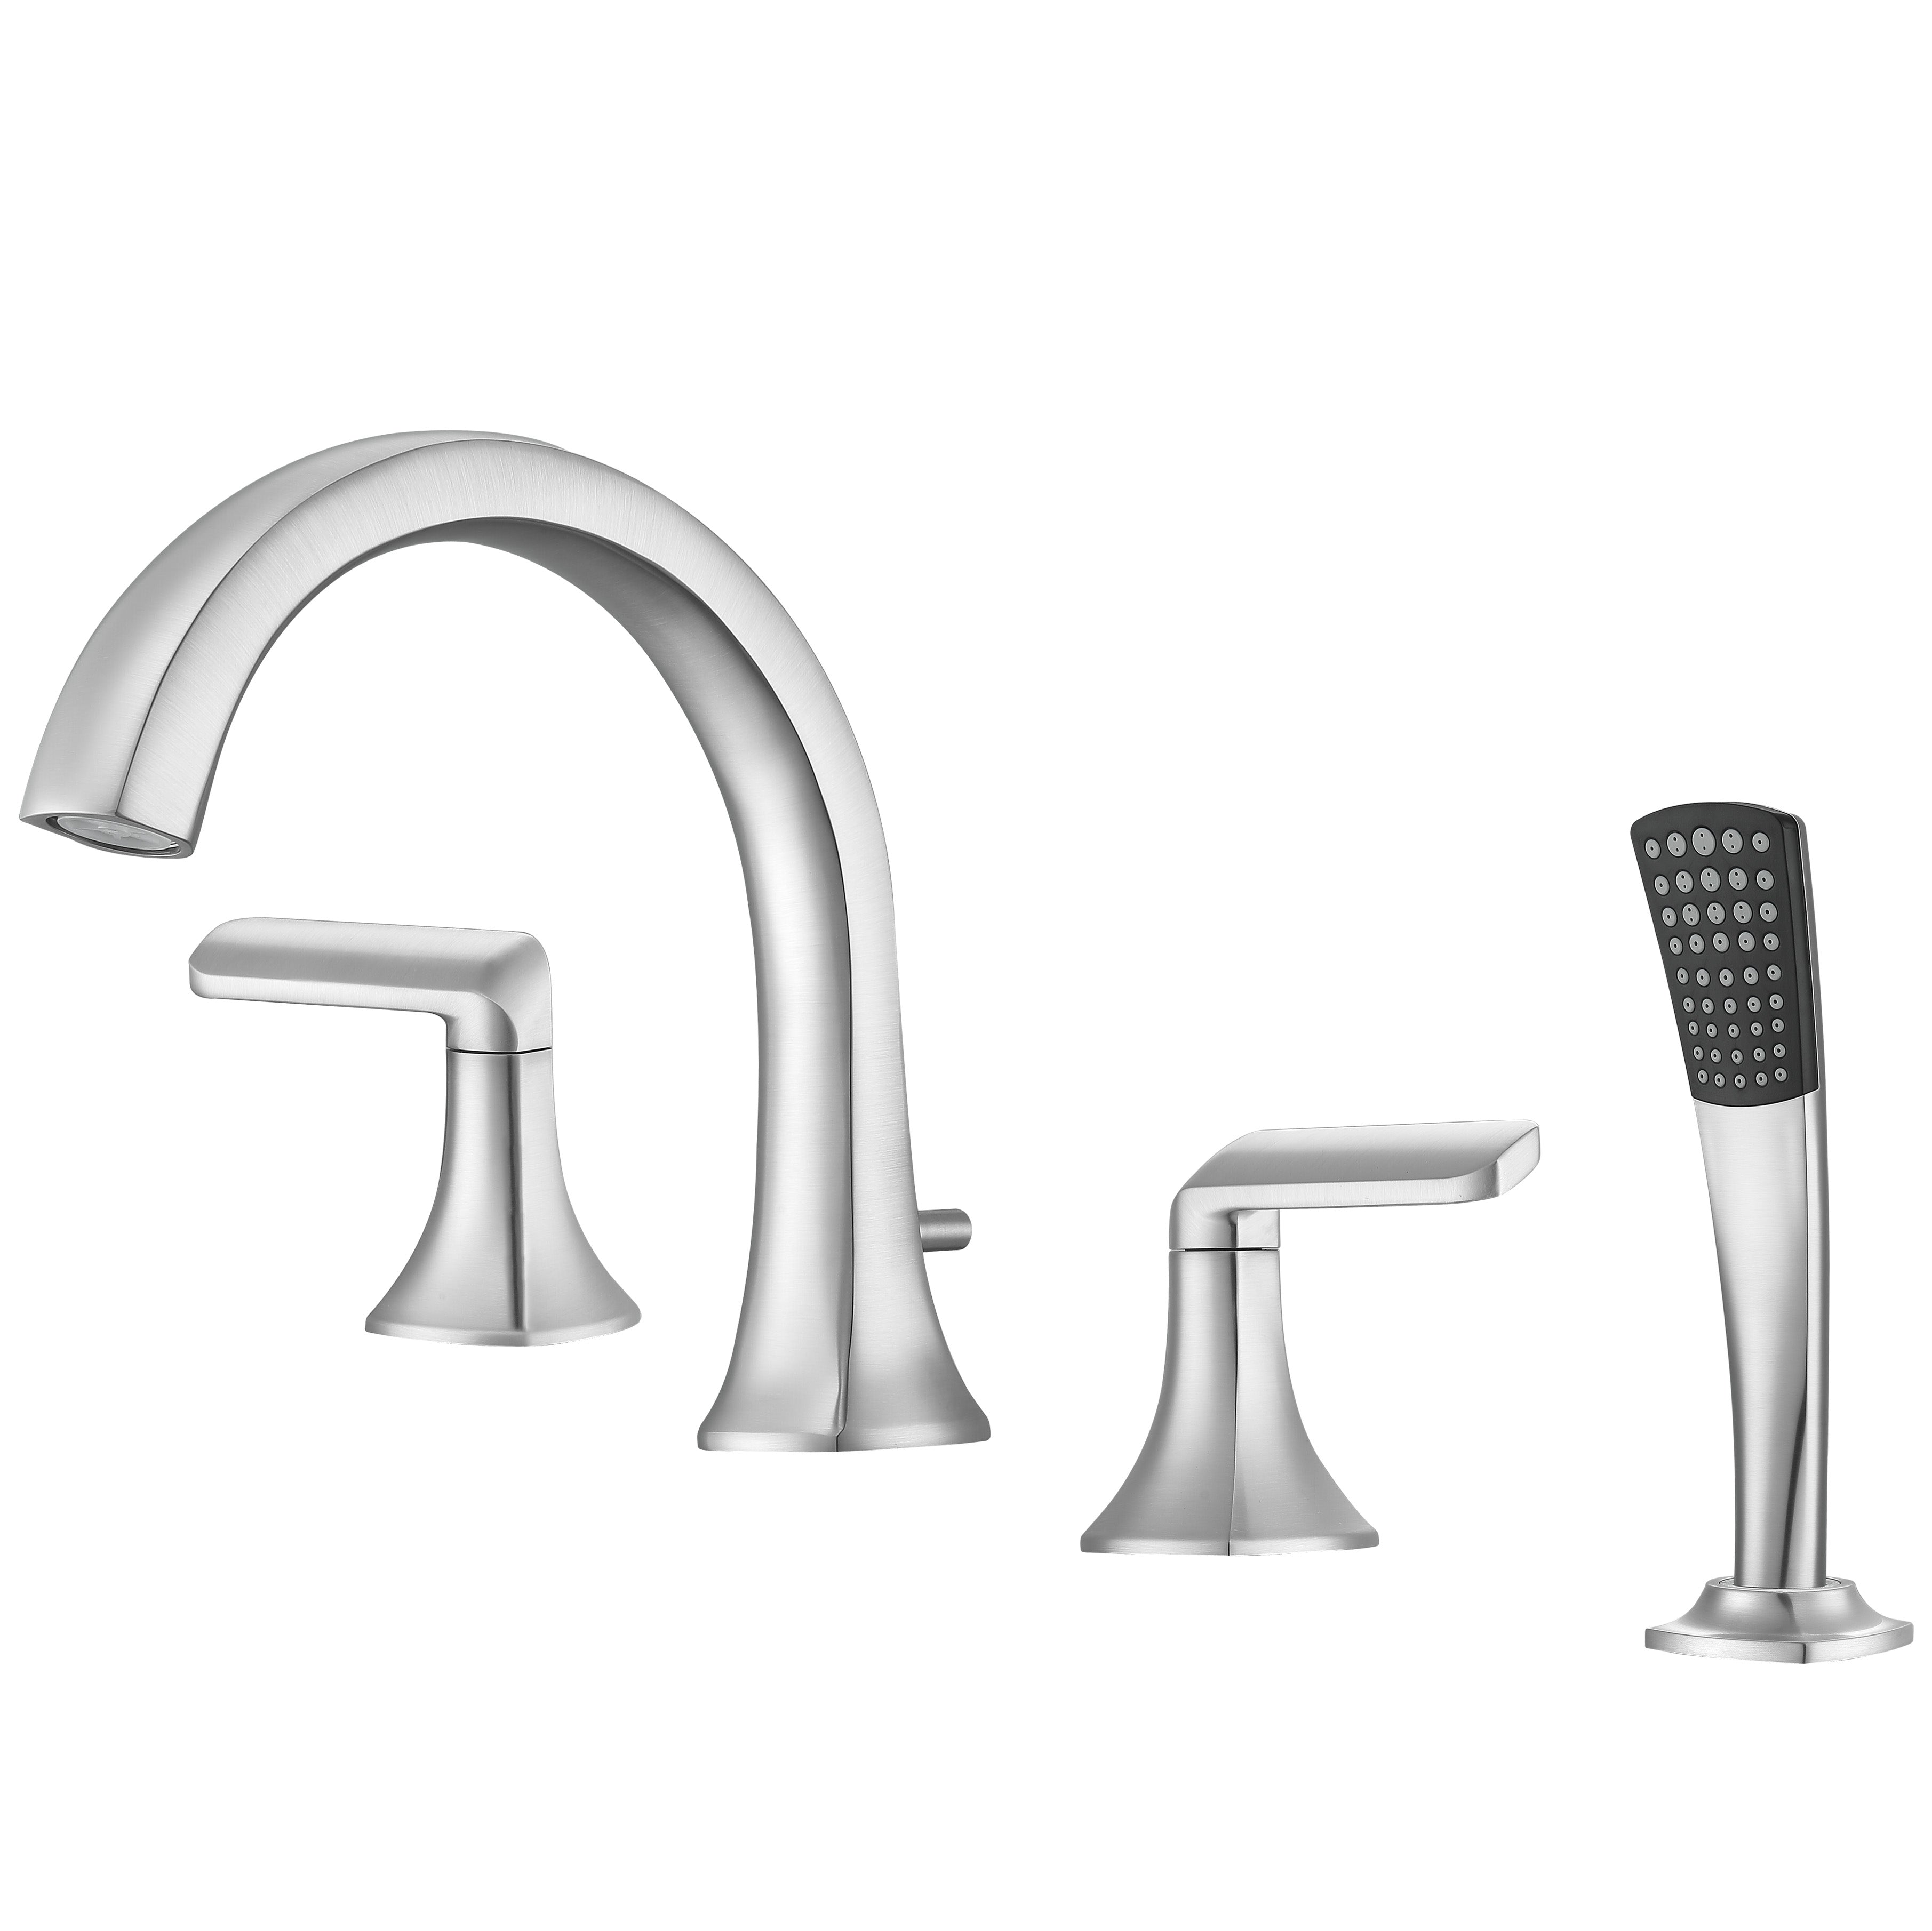 Arezzo Two Handle Roman Tub Faucet in Brushed Nickel finish